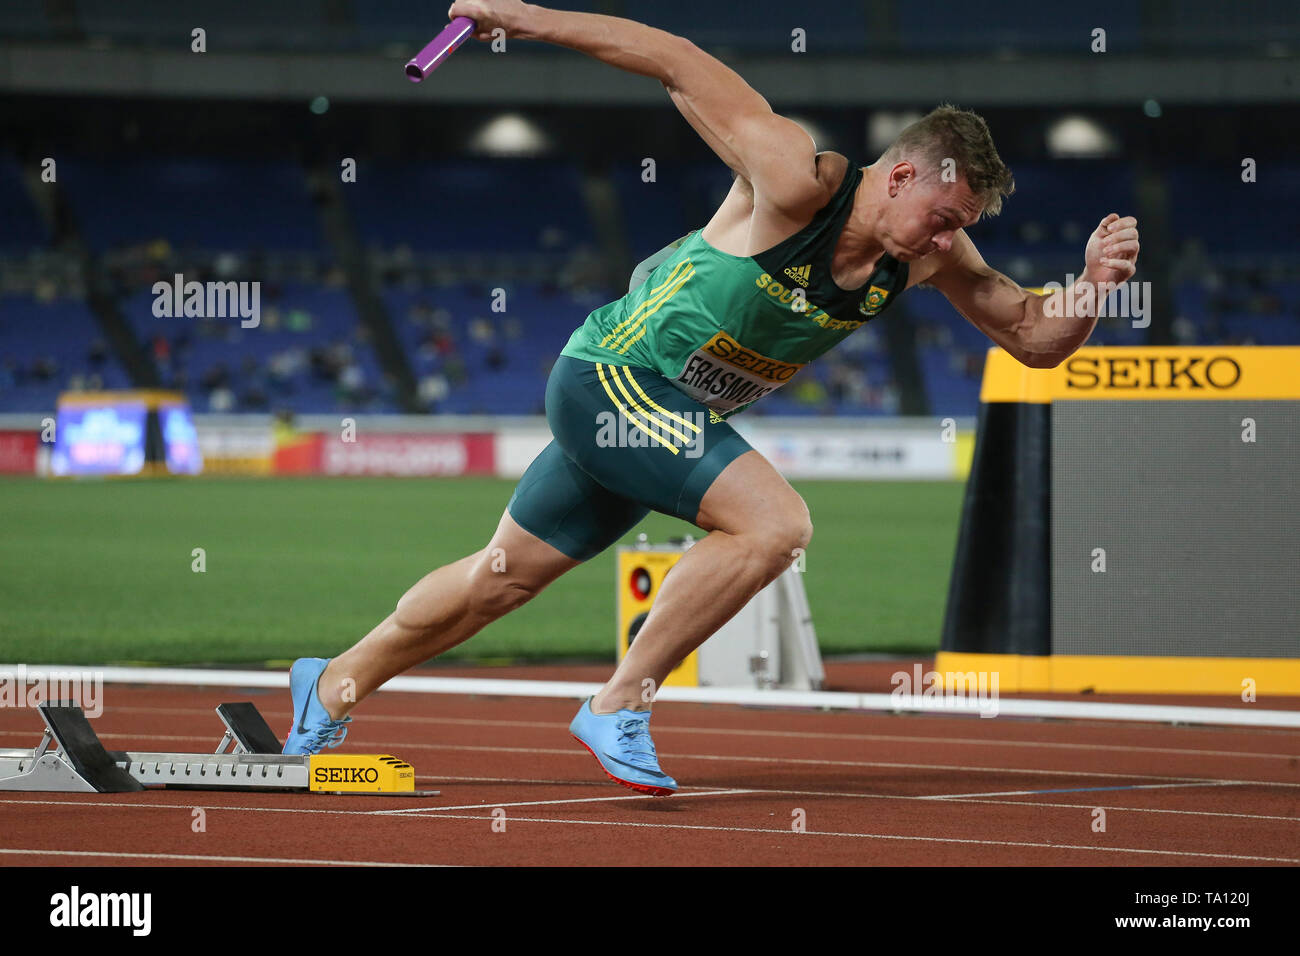 YOKOHAMA, JAPAN - MAY 11: Emile Erasmus of South Africa at the start of the  mens 4x100m relay during day 1 of the IAAF World Relays at Nissan Stadium  on May 11,